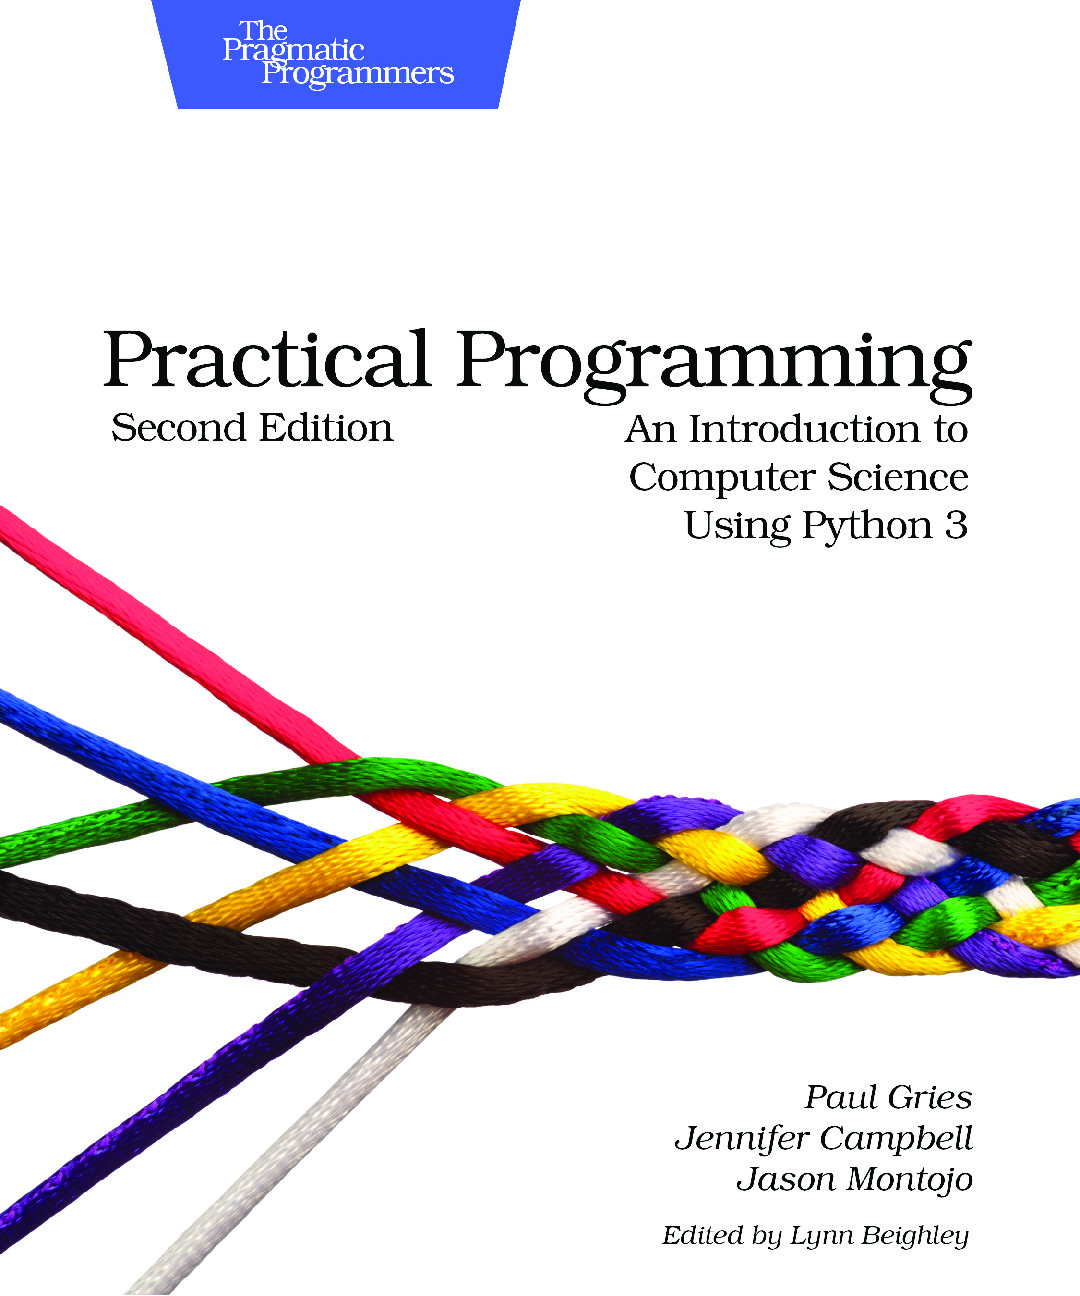 Practical Programming – An Introduction to Computer Science Using Python 3